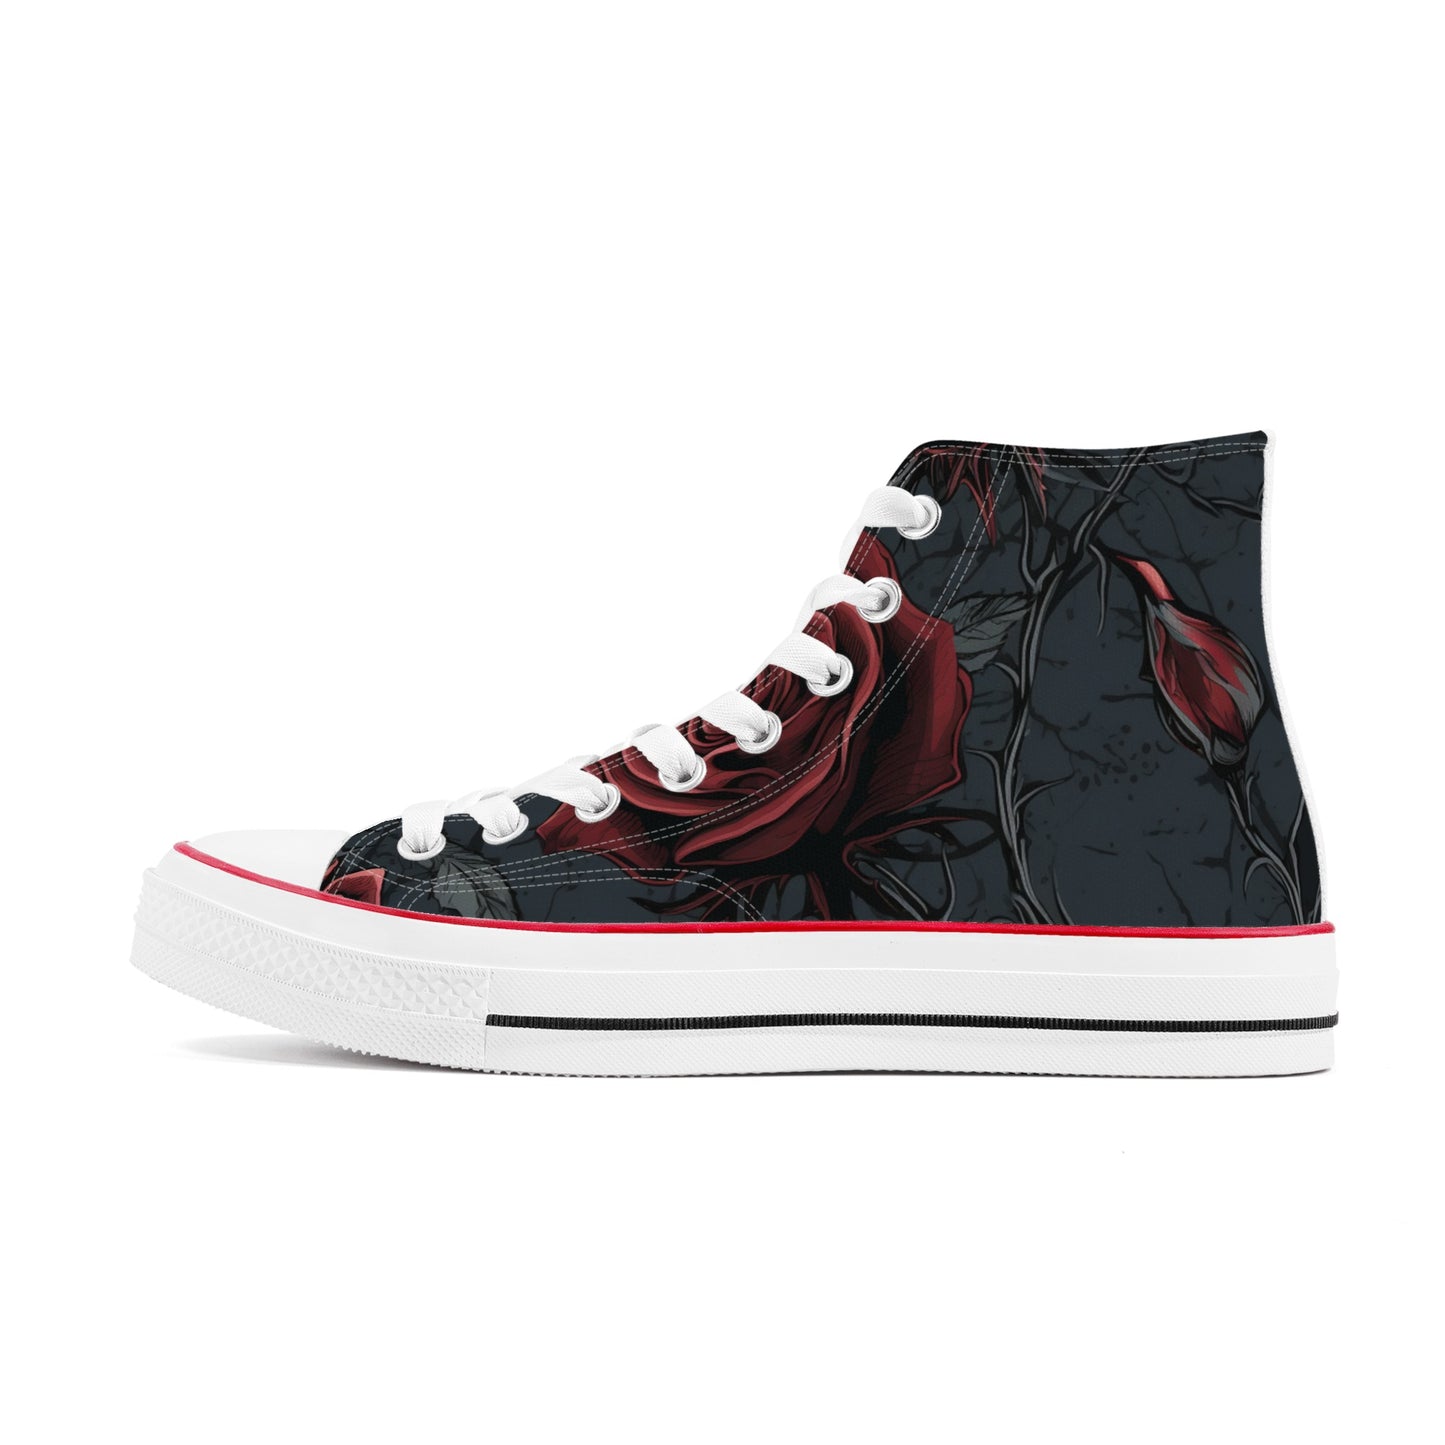 Red Rose Gothic Classic High Top Canvas Shoes